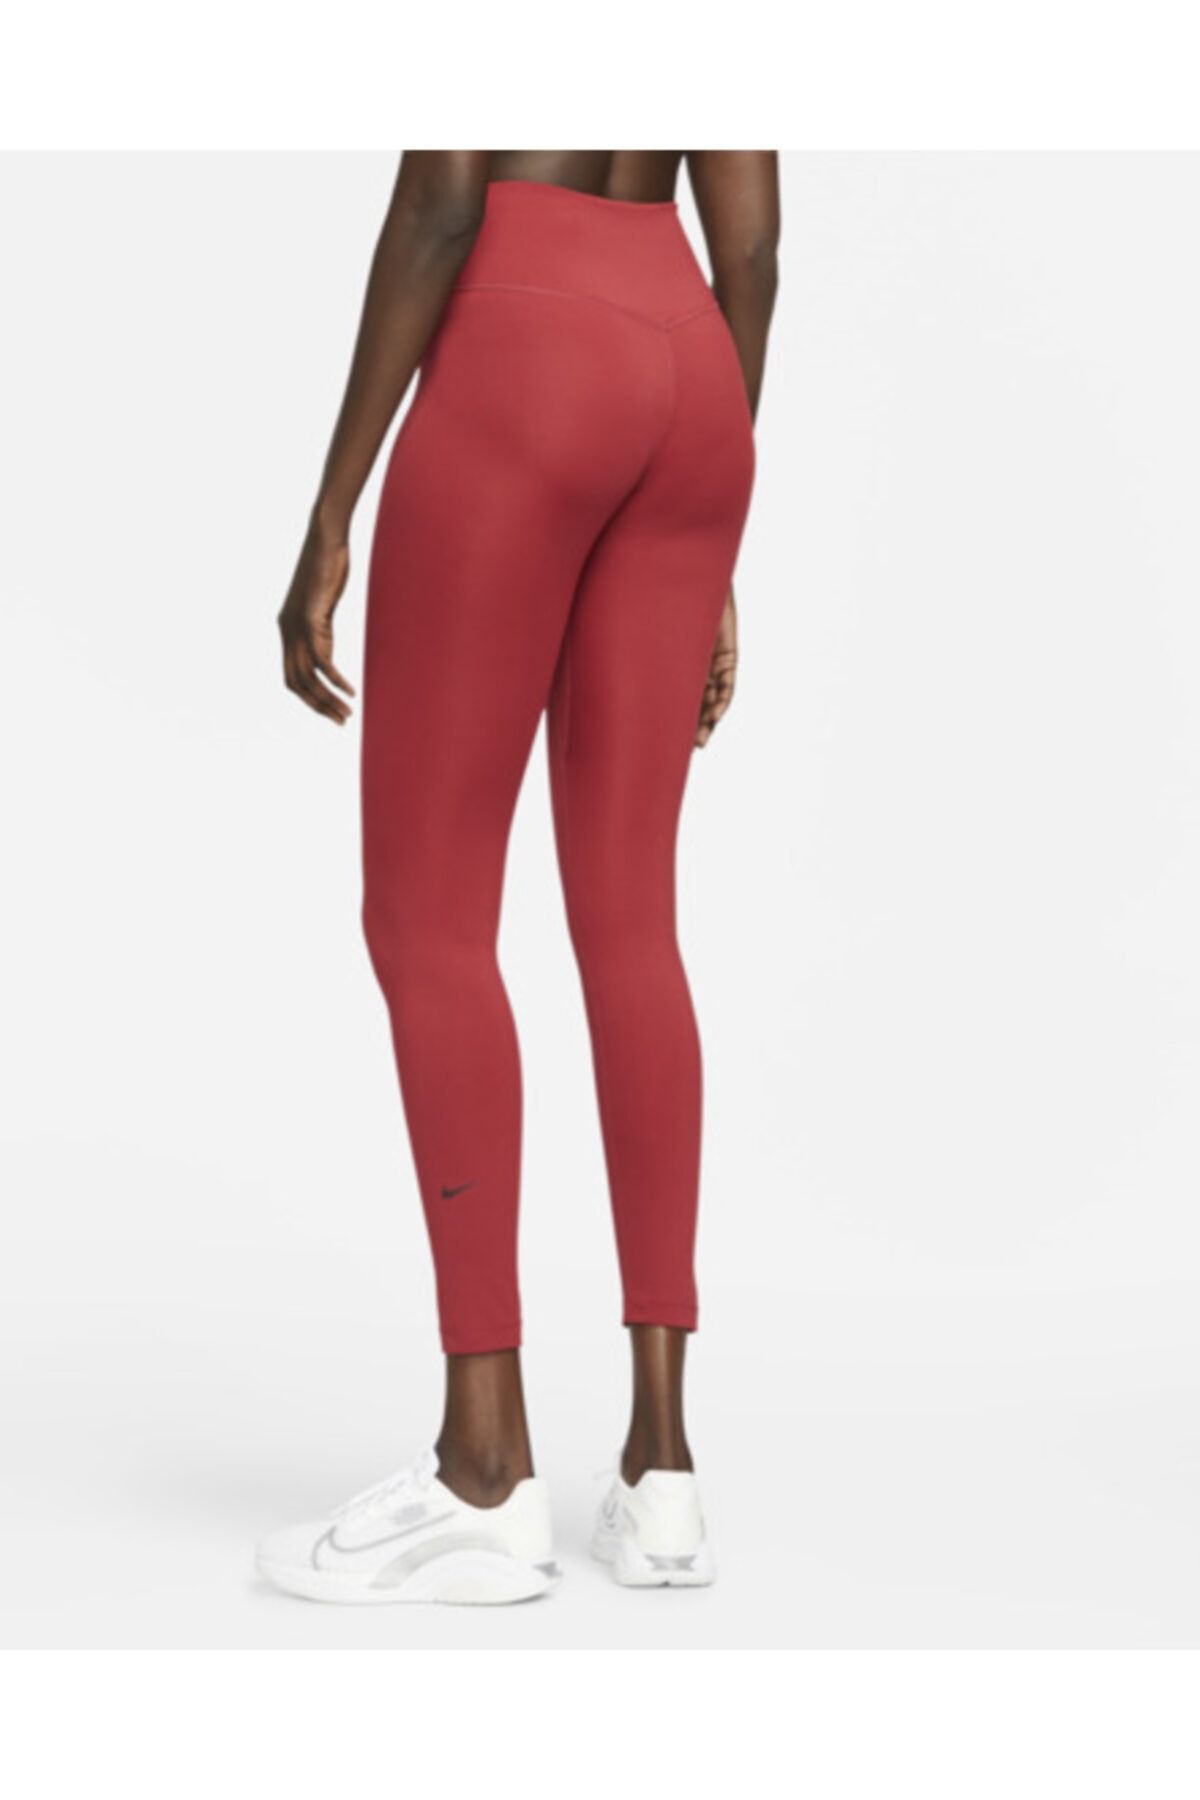 Nike One Dri-fit Mid-rise Dark Red Color Women's Tights - Trendyol